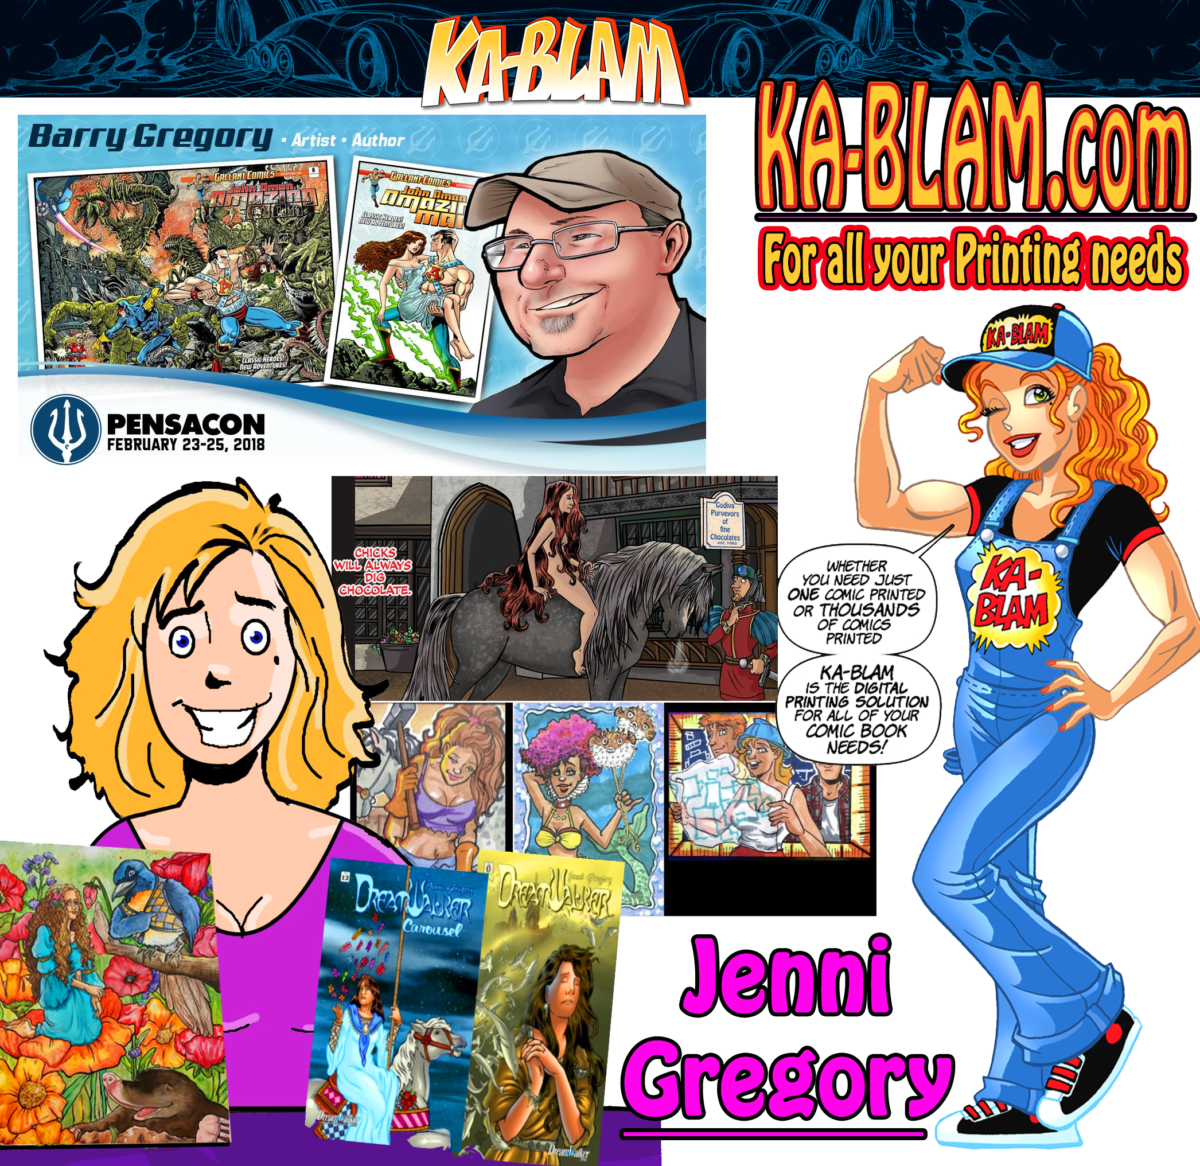 COMIC CON HIGHWAY FLORIDA EXIT:-Pensacola- Jenni and Barry Gregory will be at PENSACON  .